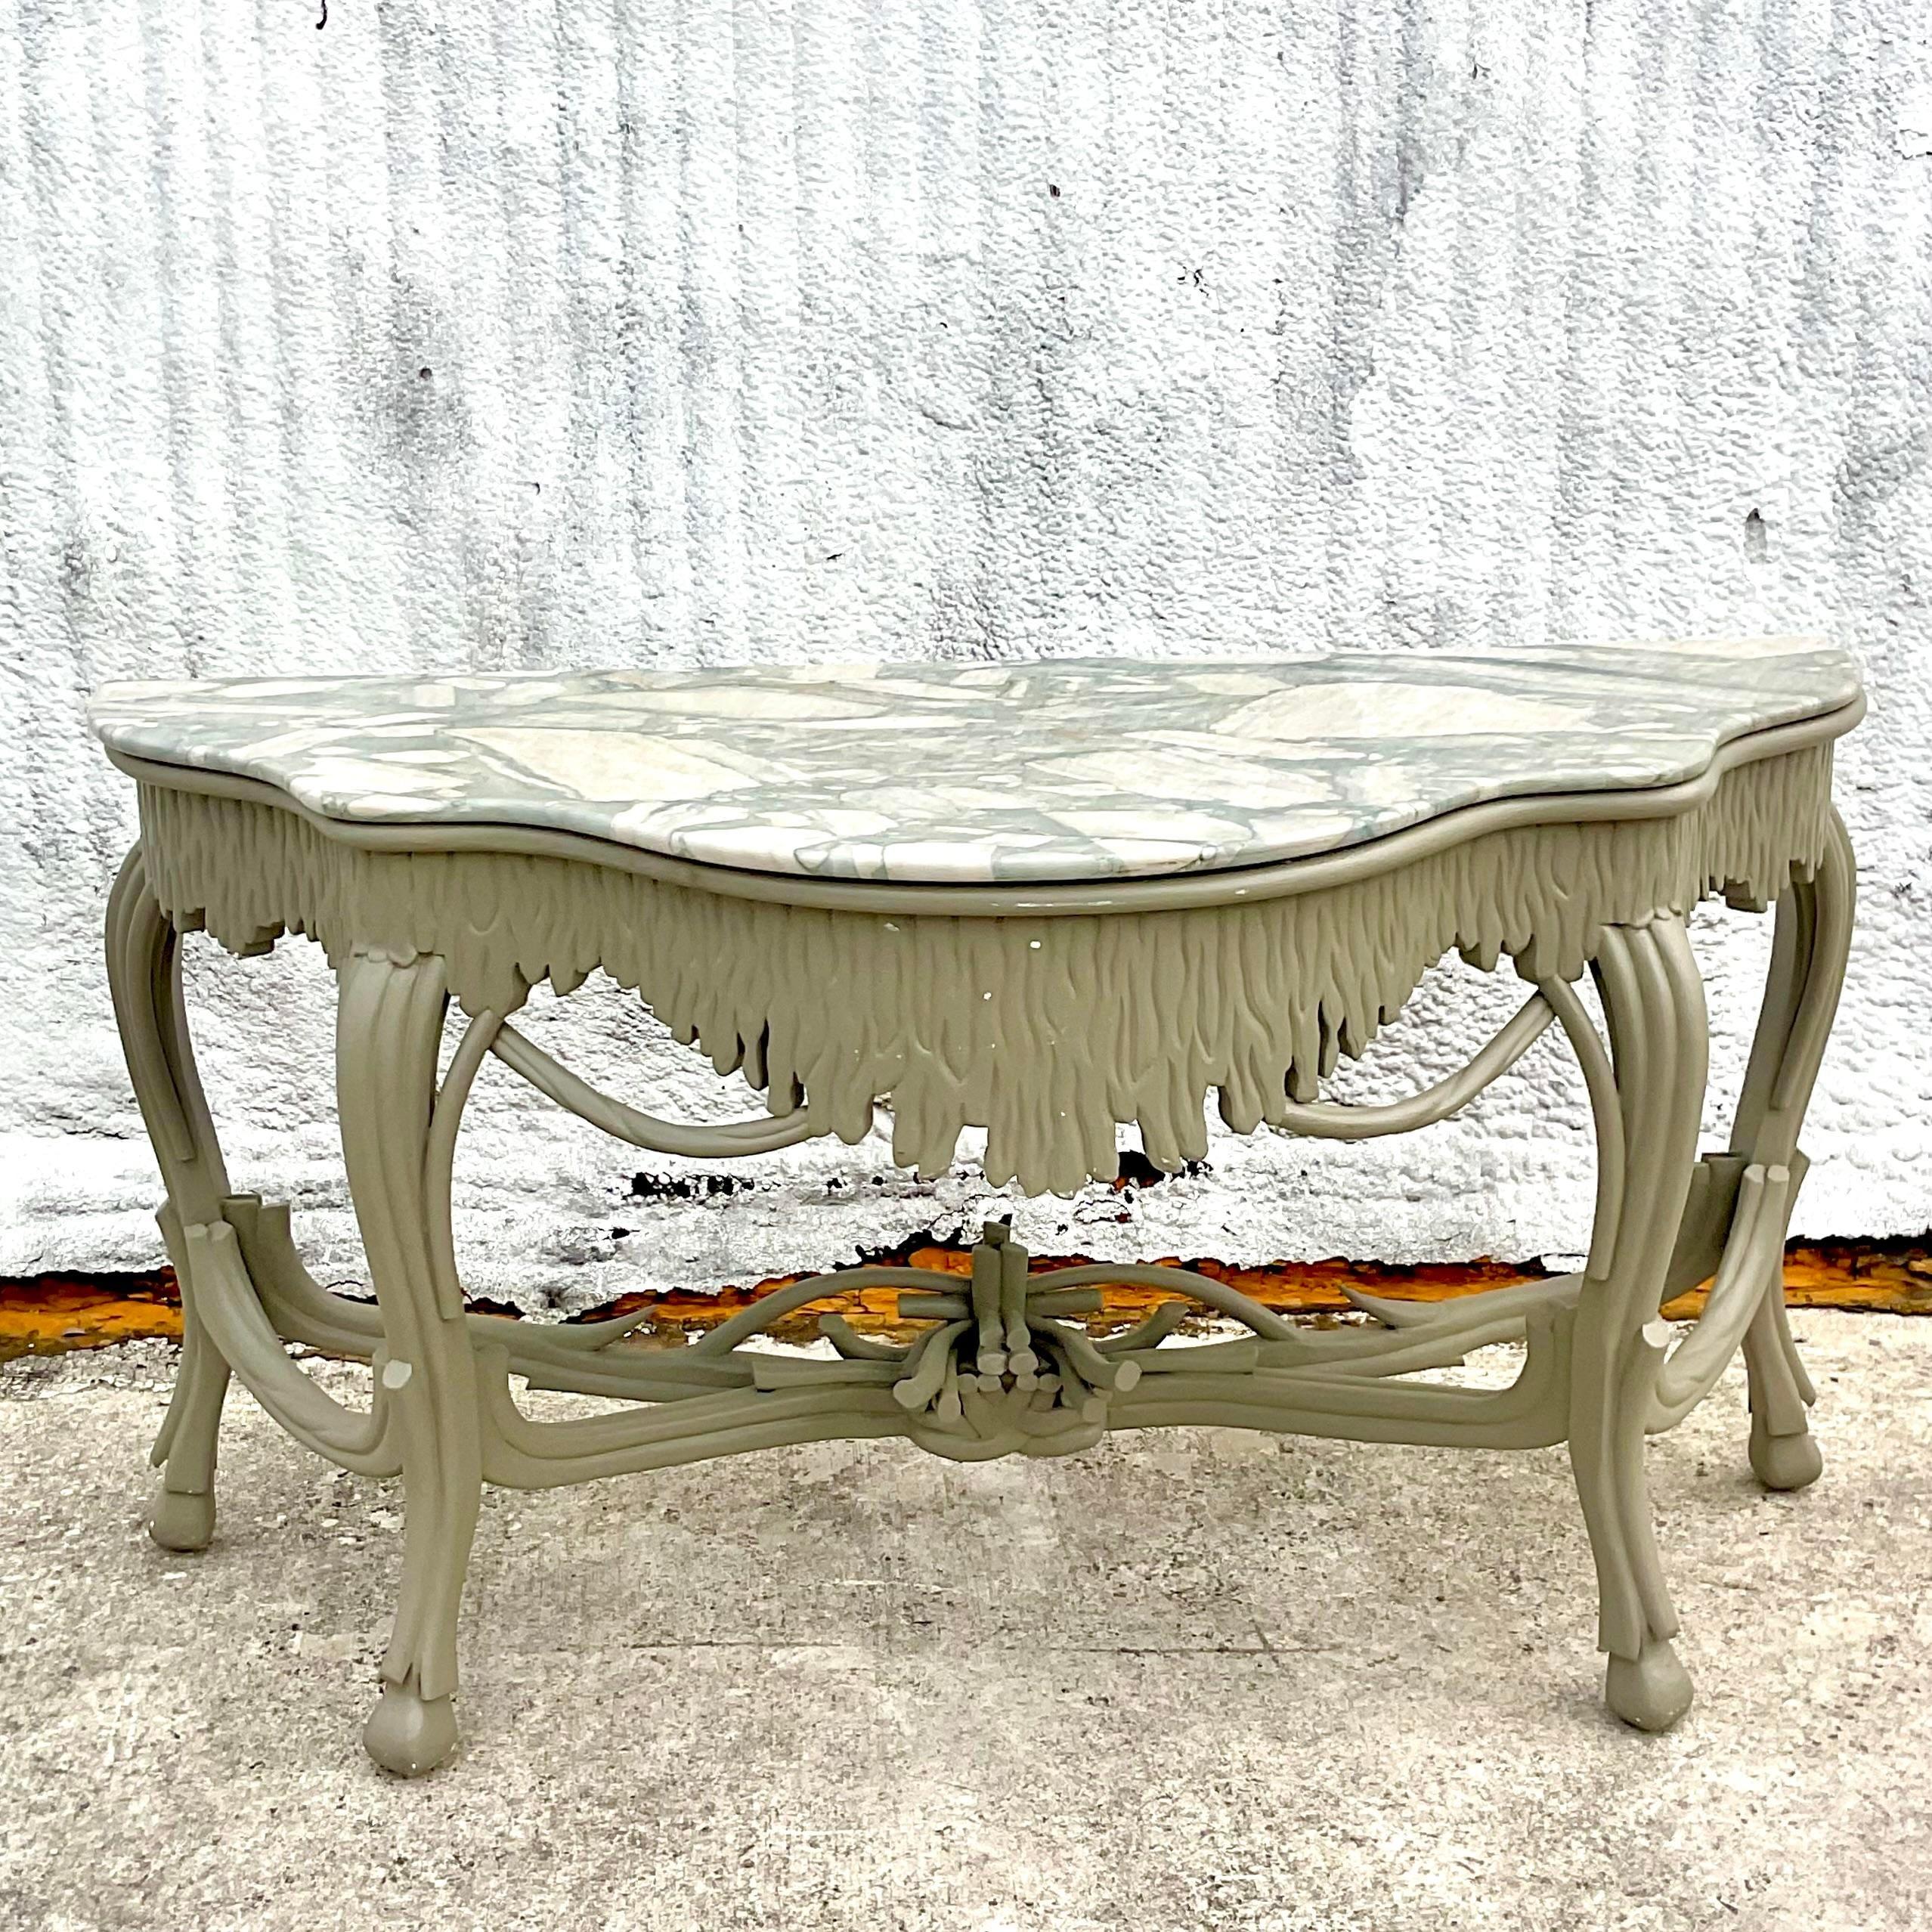 Step into timeless American elegance with our Vintage Regency Stone Top Faux Bois Console Table. Inspired by the opulence of Regency design, this table boasts a sophisticated faux bois finish and a luxurious stone top. Perfect for adding a touch of